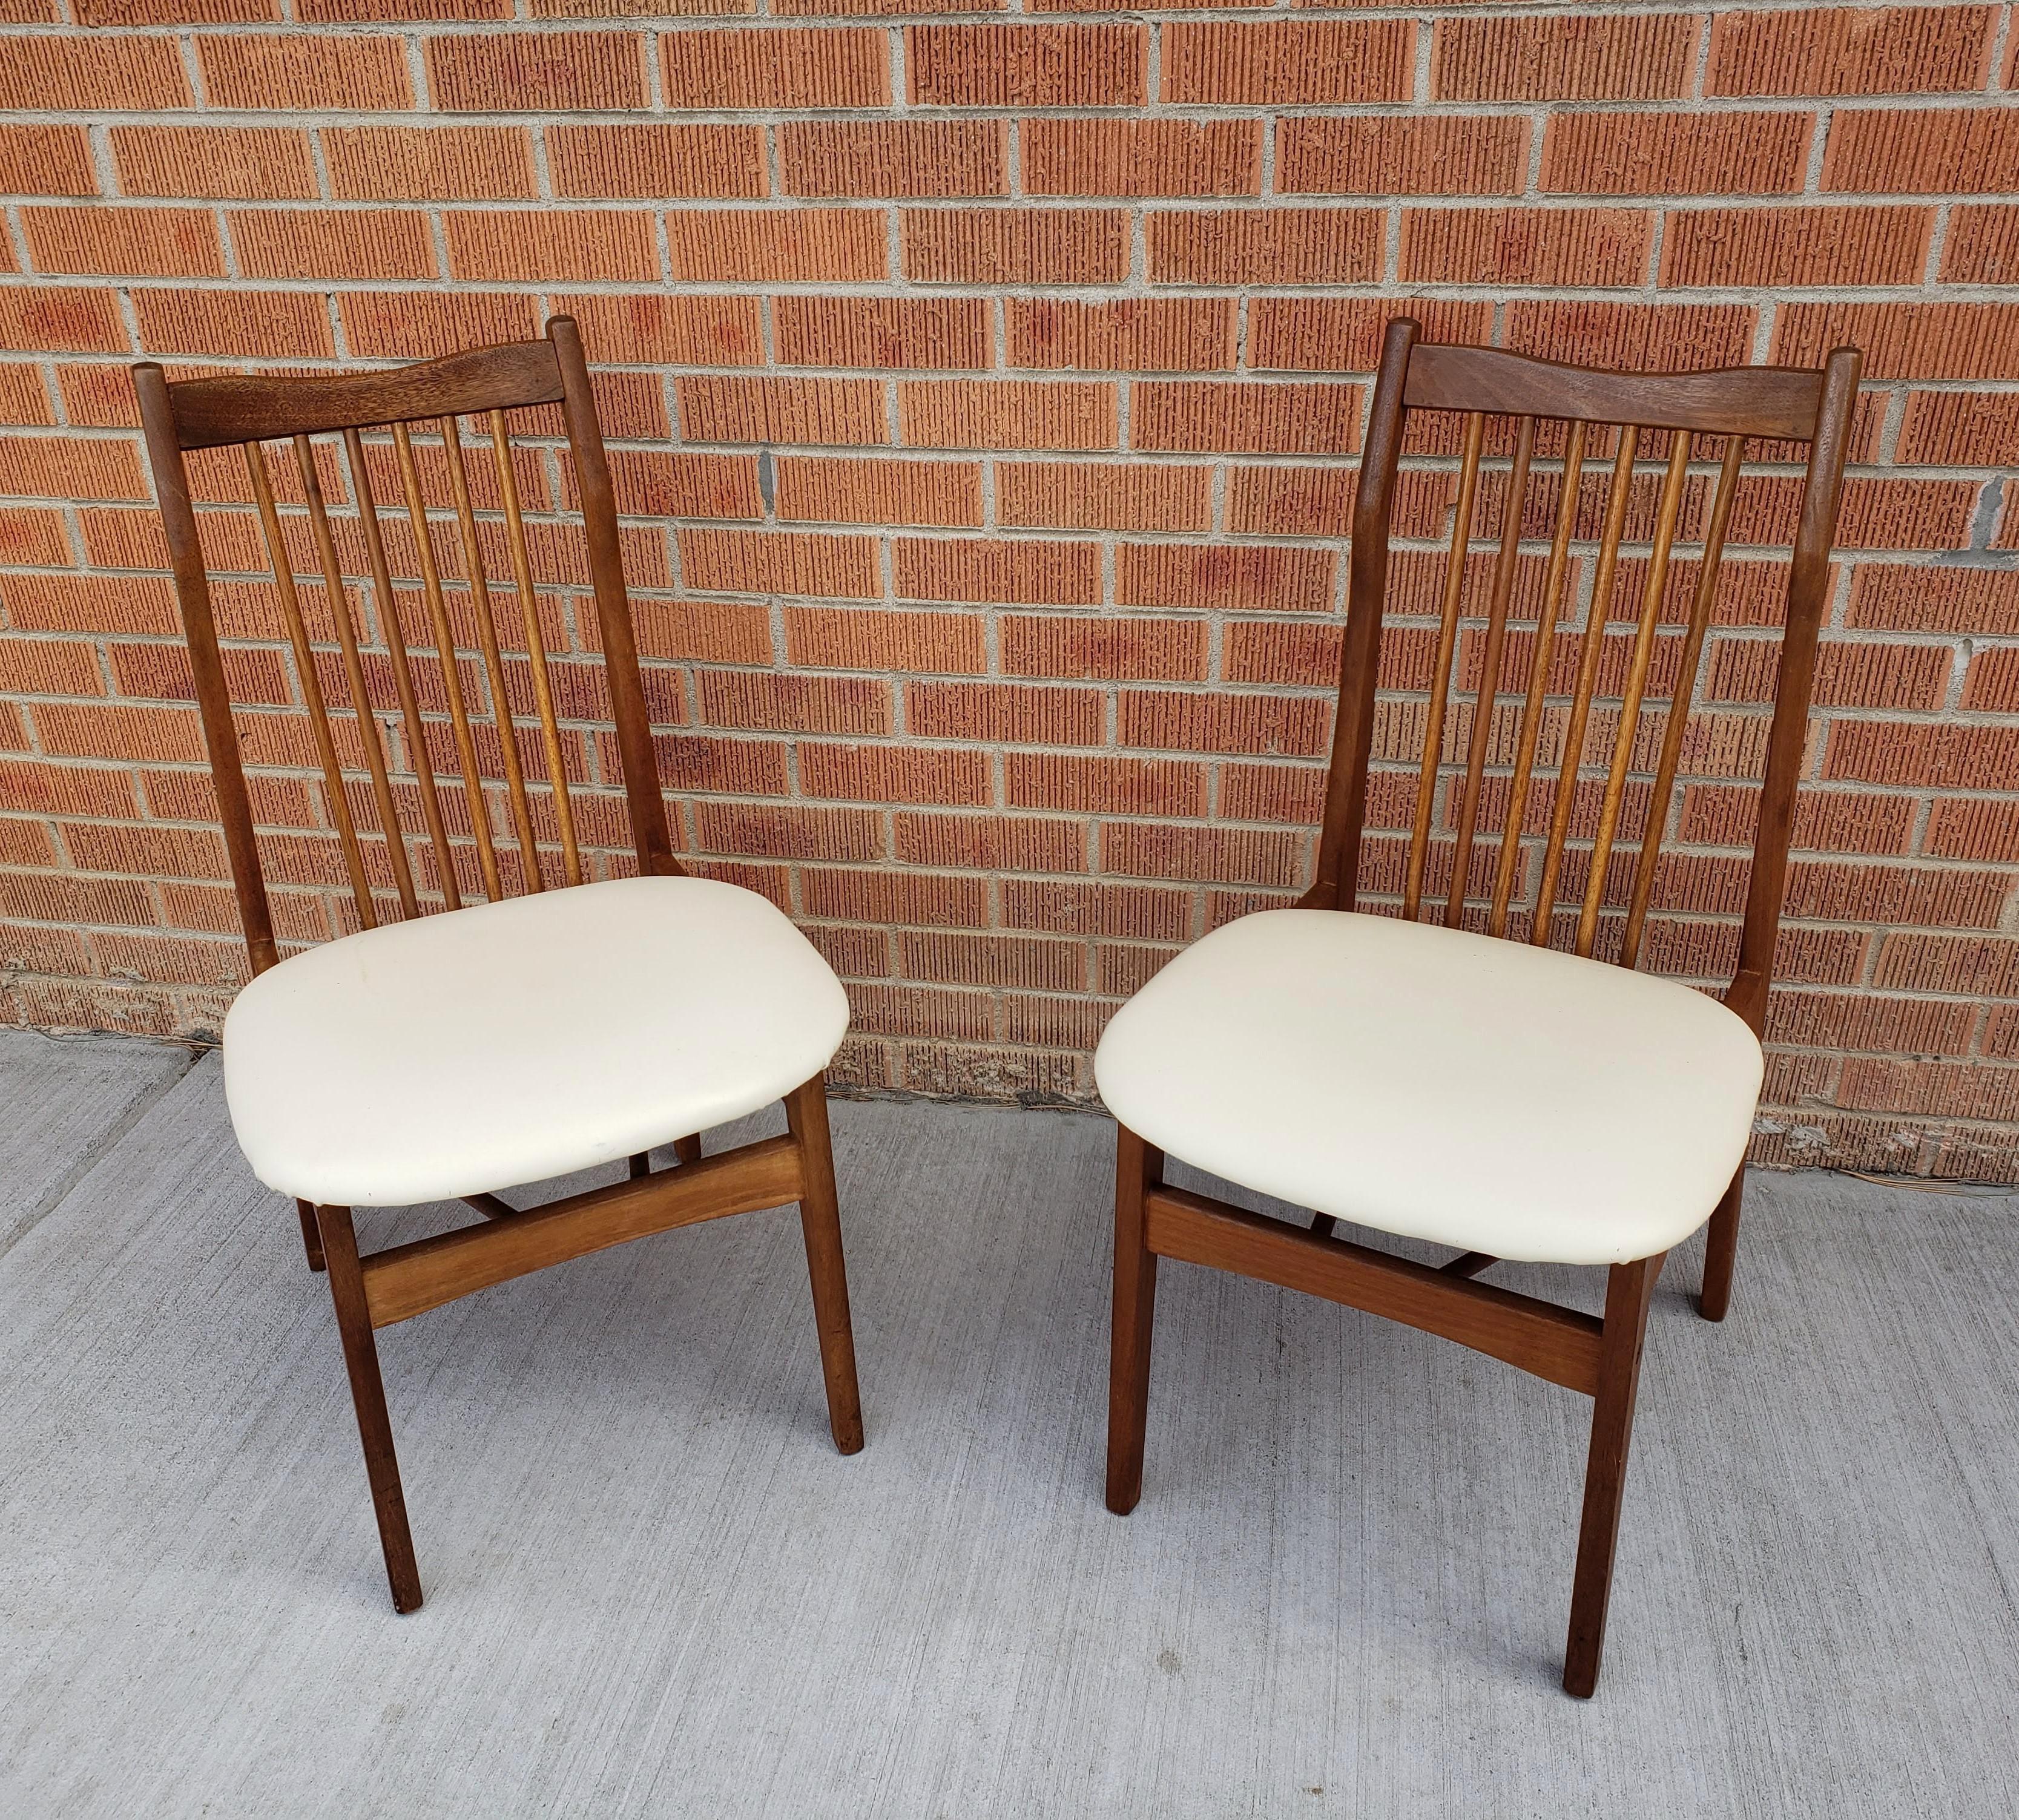 Pair of vintage Danish style mid-century dining chairs with lovely lines. The seats have their original coverings in a cream color in good condition. This material is durable and easy to clean.